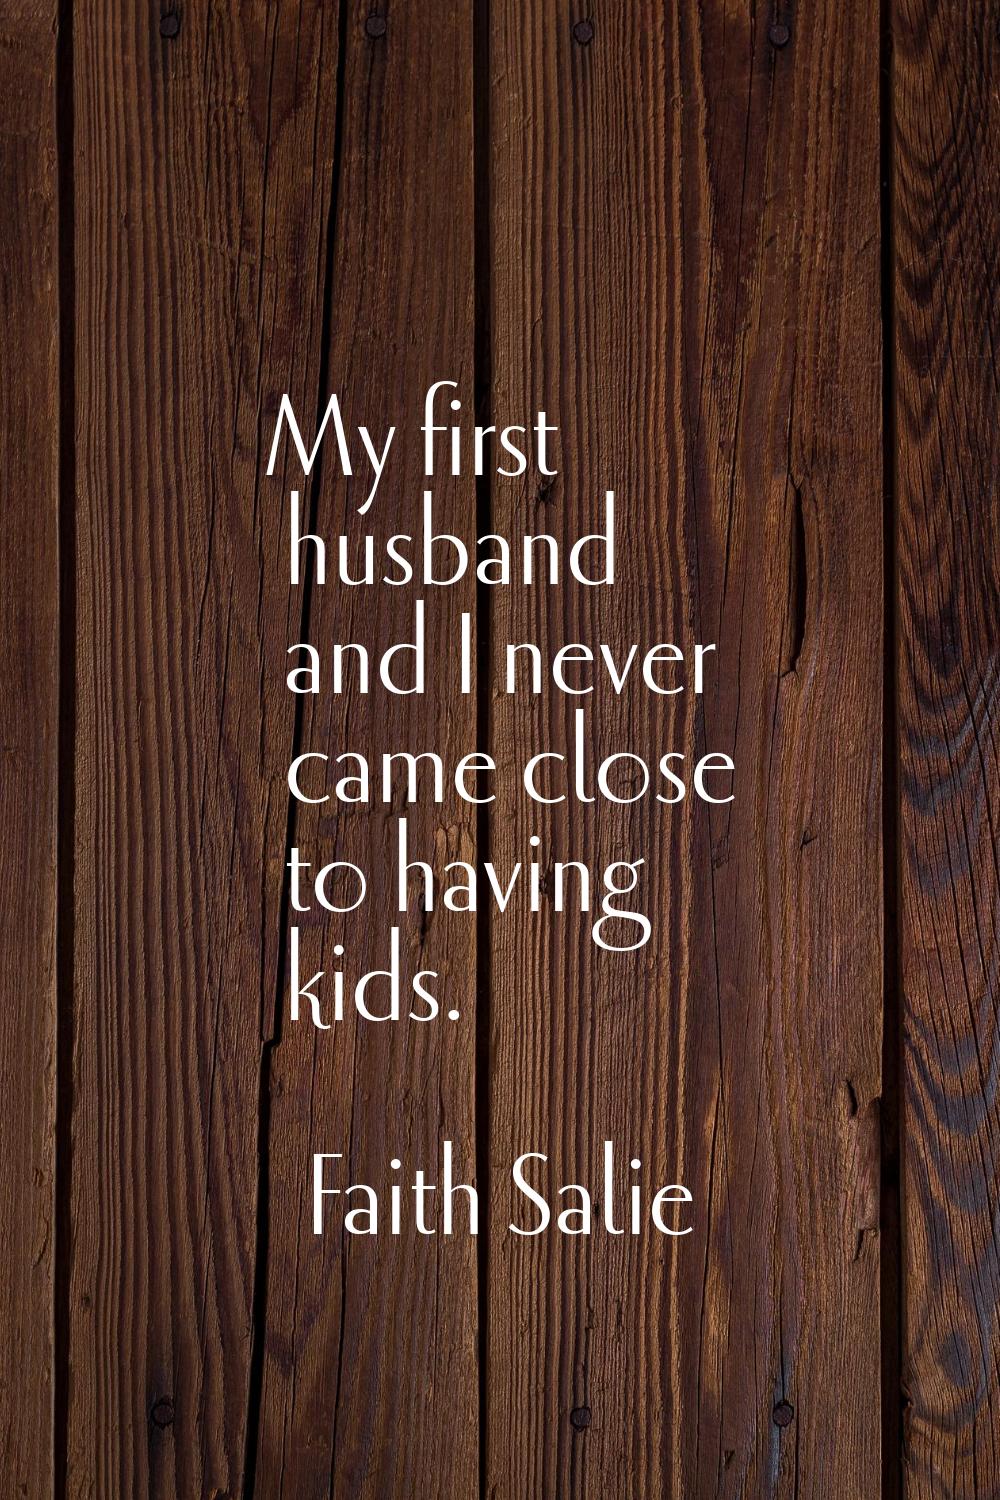 My first husband and I never came close to having kids.